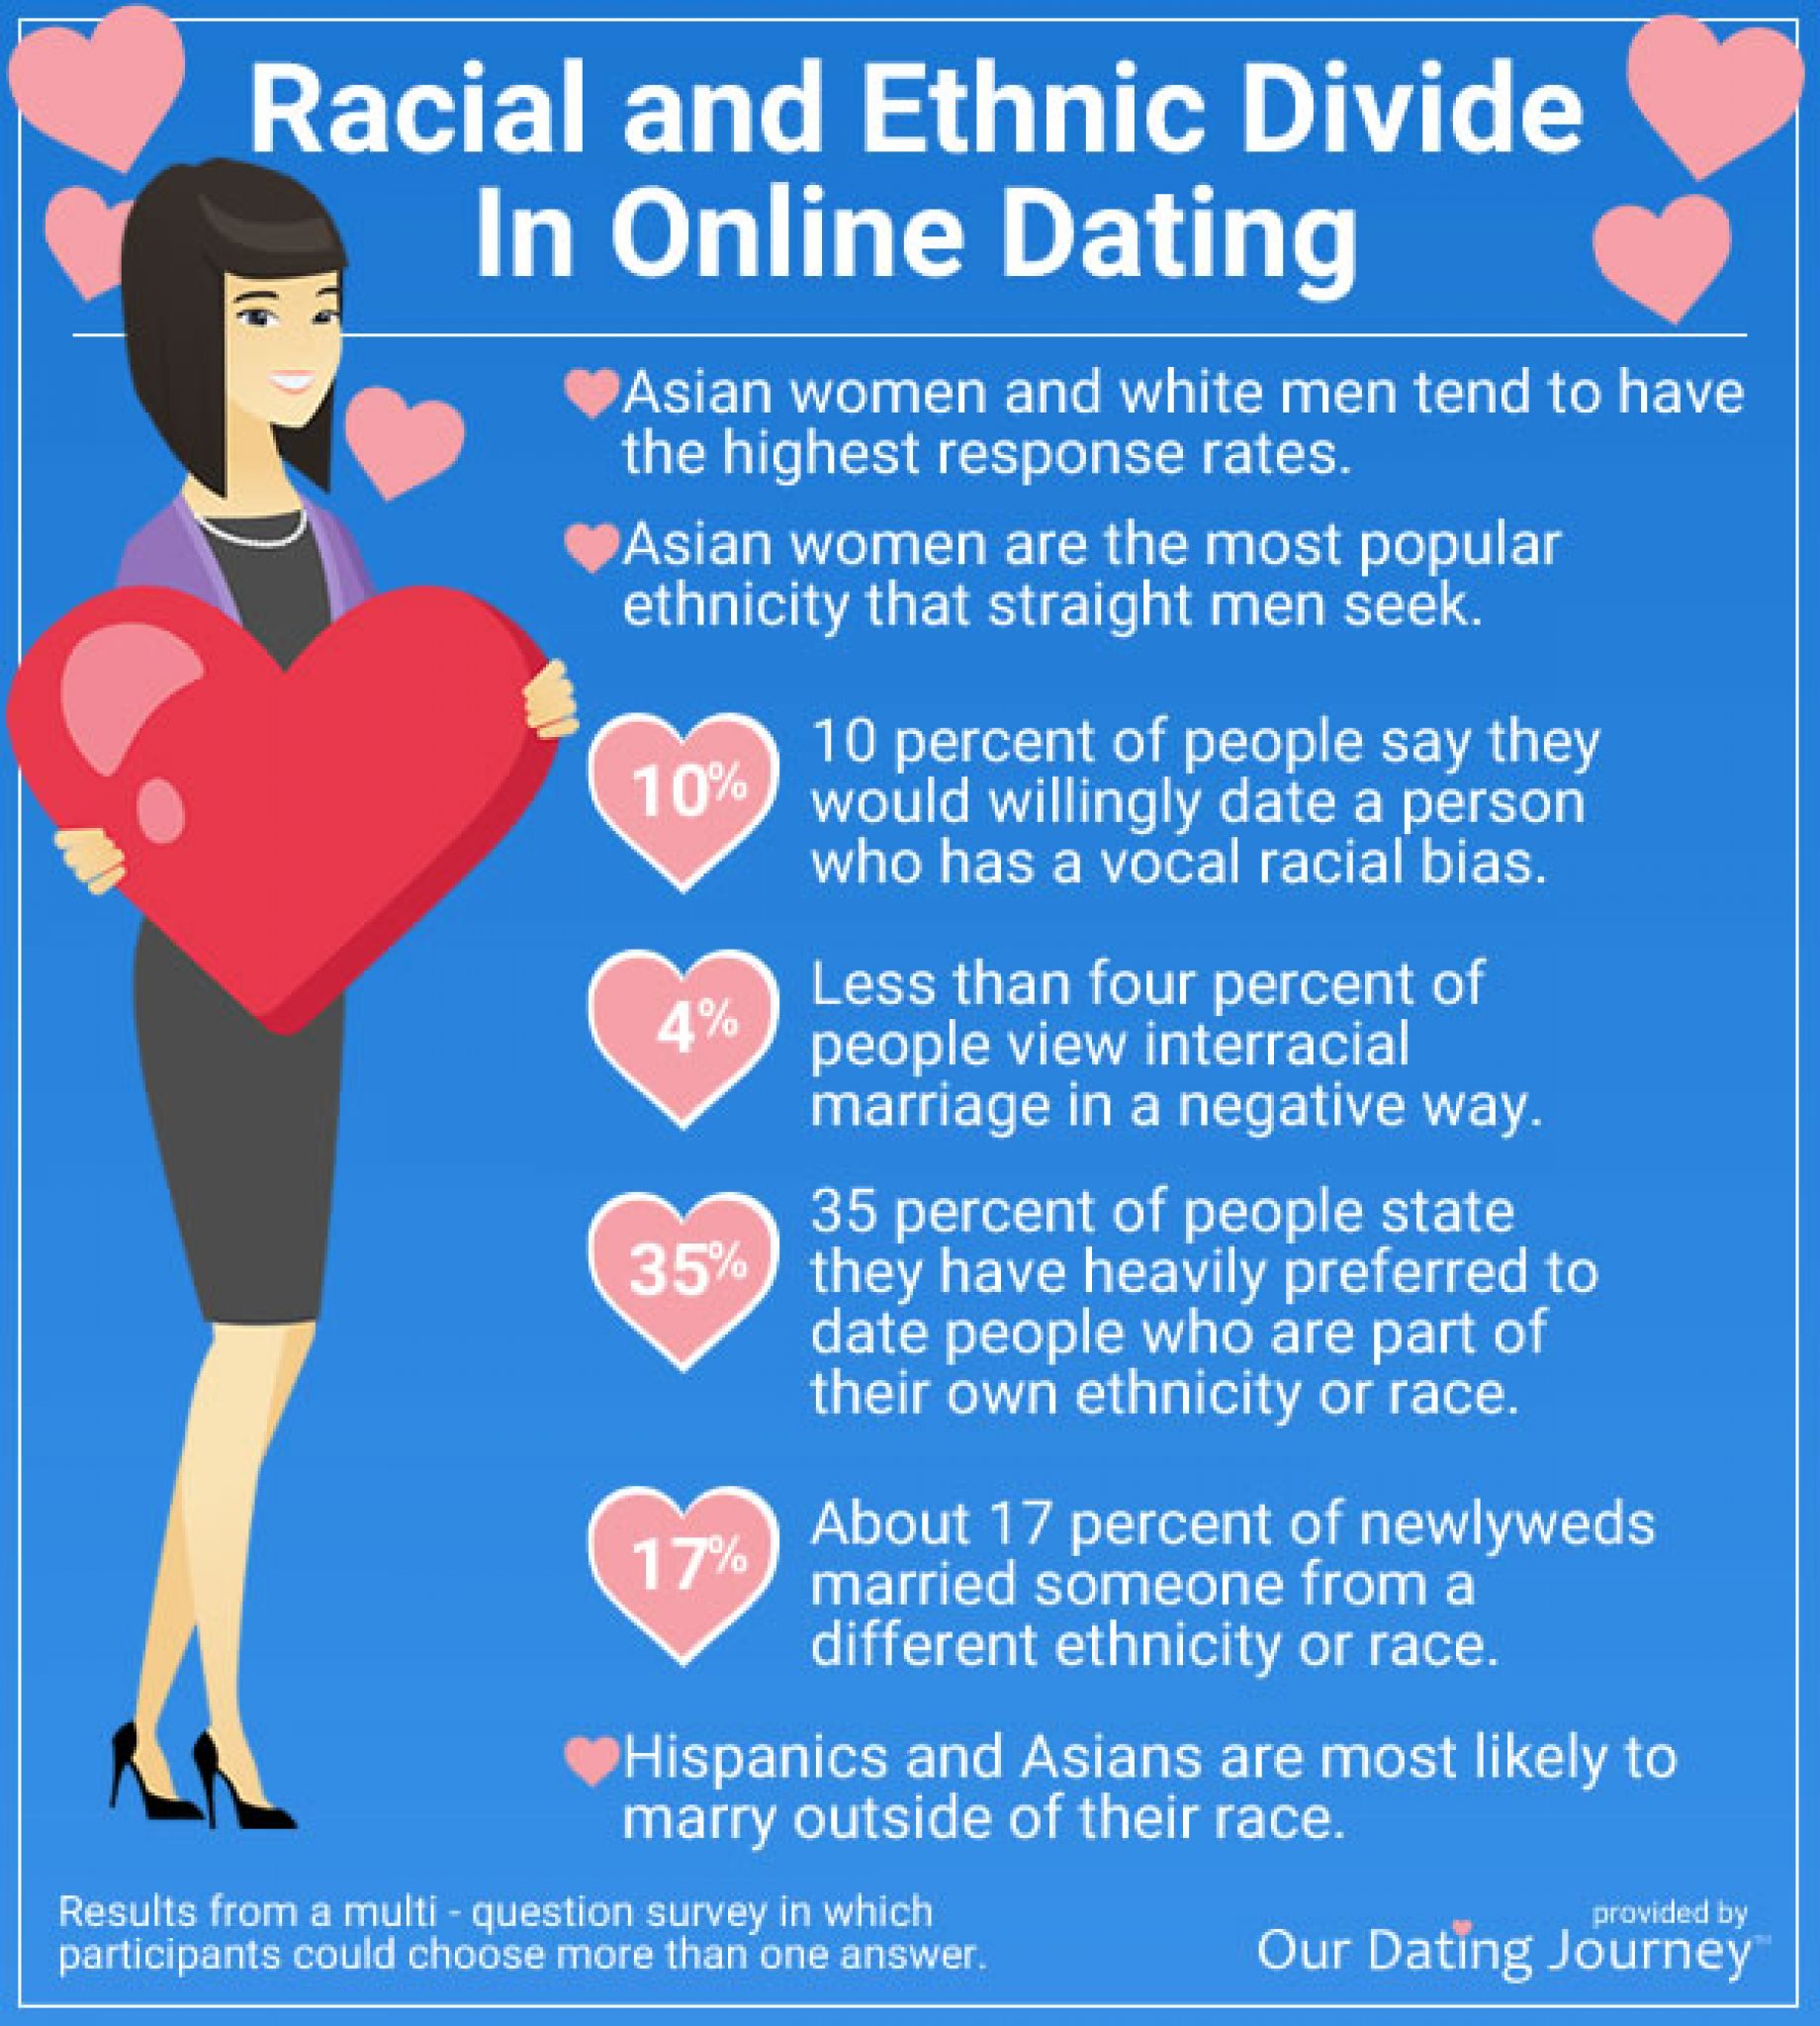 Online dating market overview: Part 2 — Dating Pro